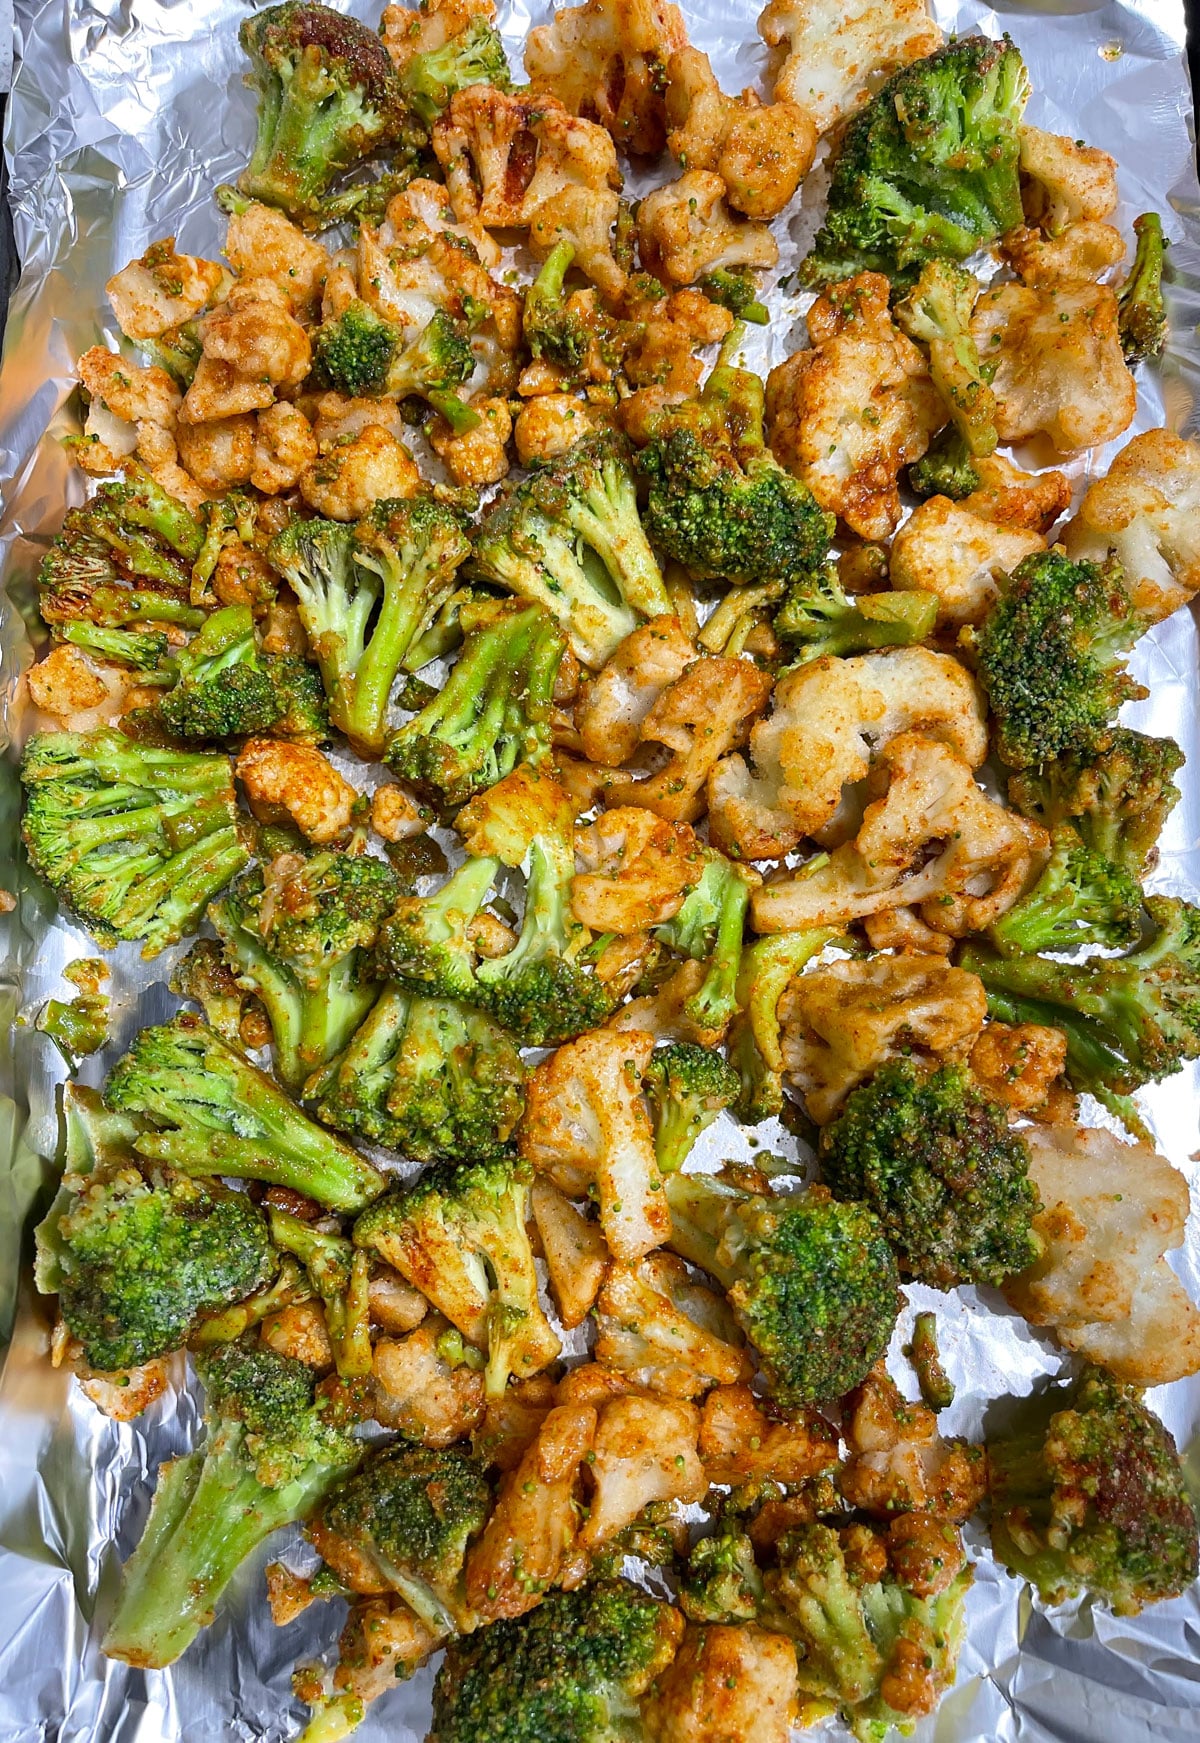 layer the seasoned broccoli and cauliflower in a baking sheet